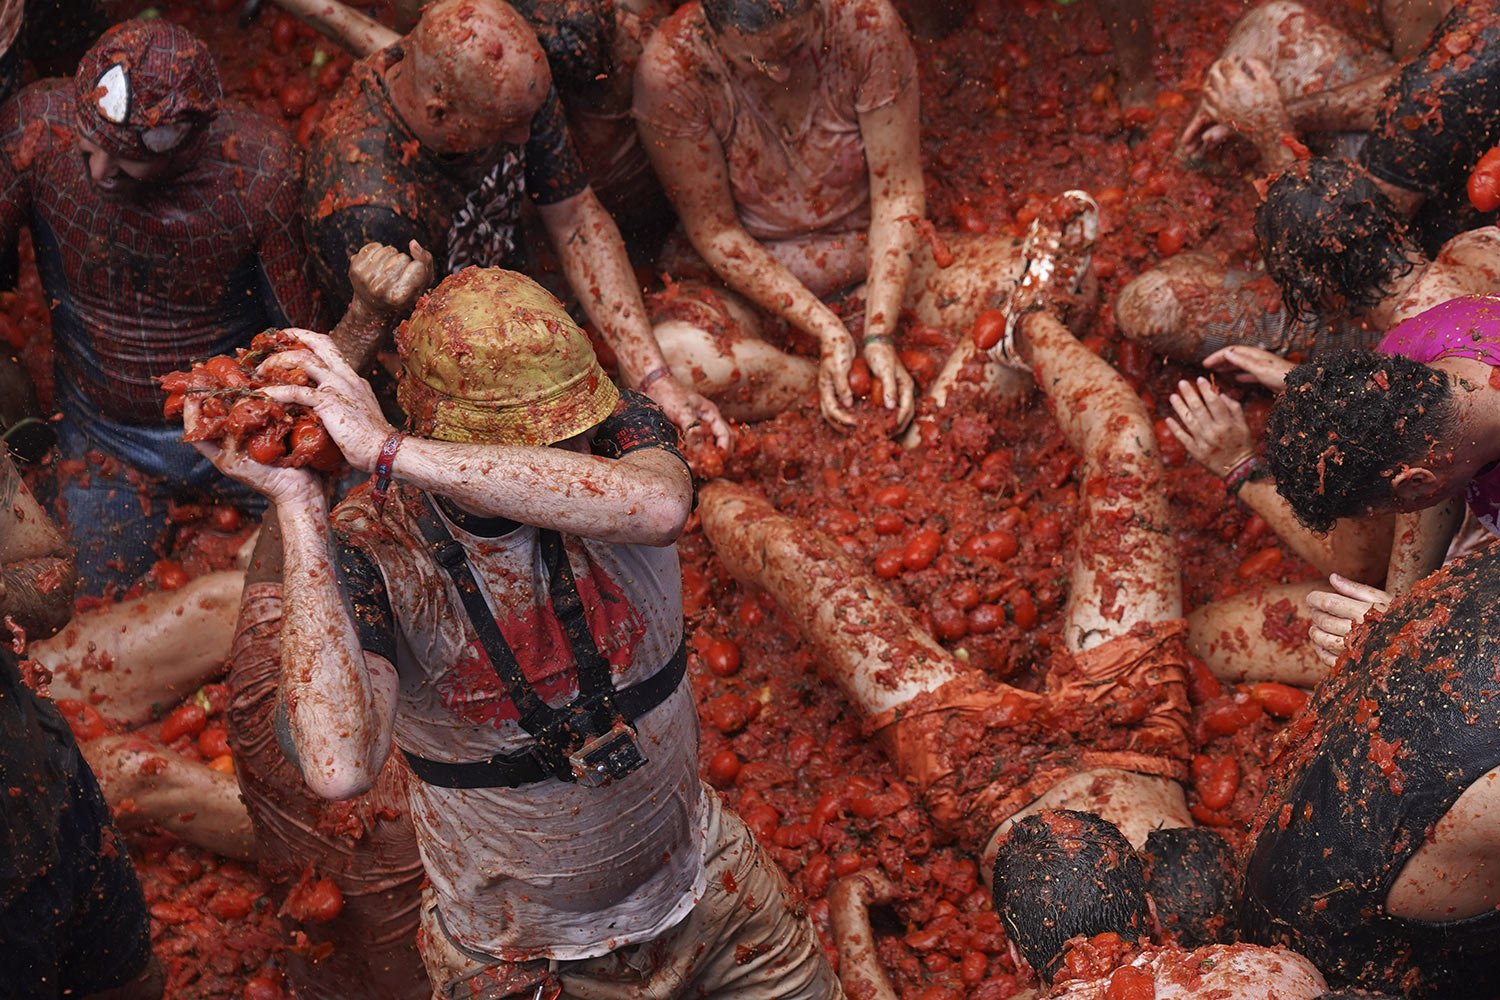  A man winds up with a handful of overripe tomatoes to hurl at participants in the annual “Tomatina” festival, in Bunol, Spain, Wednesday, Aug. 30, 2023. (AP Photo/Alberto Saiz) 